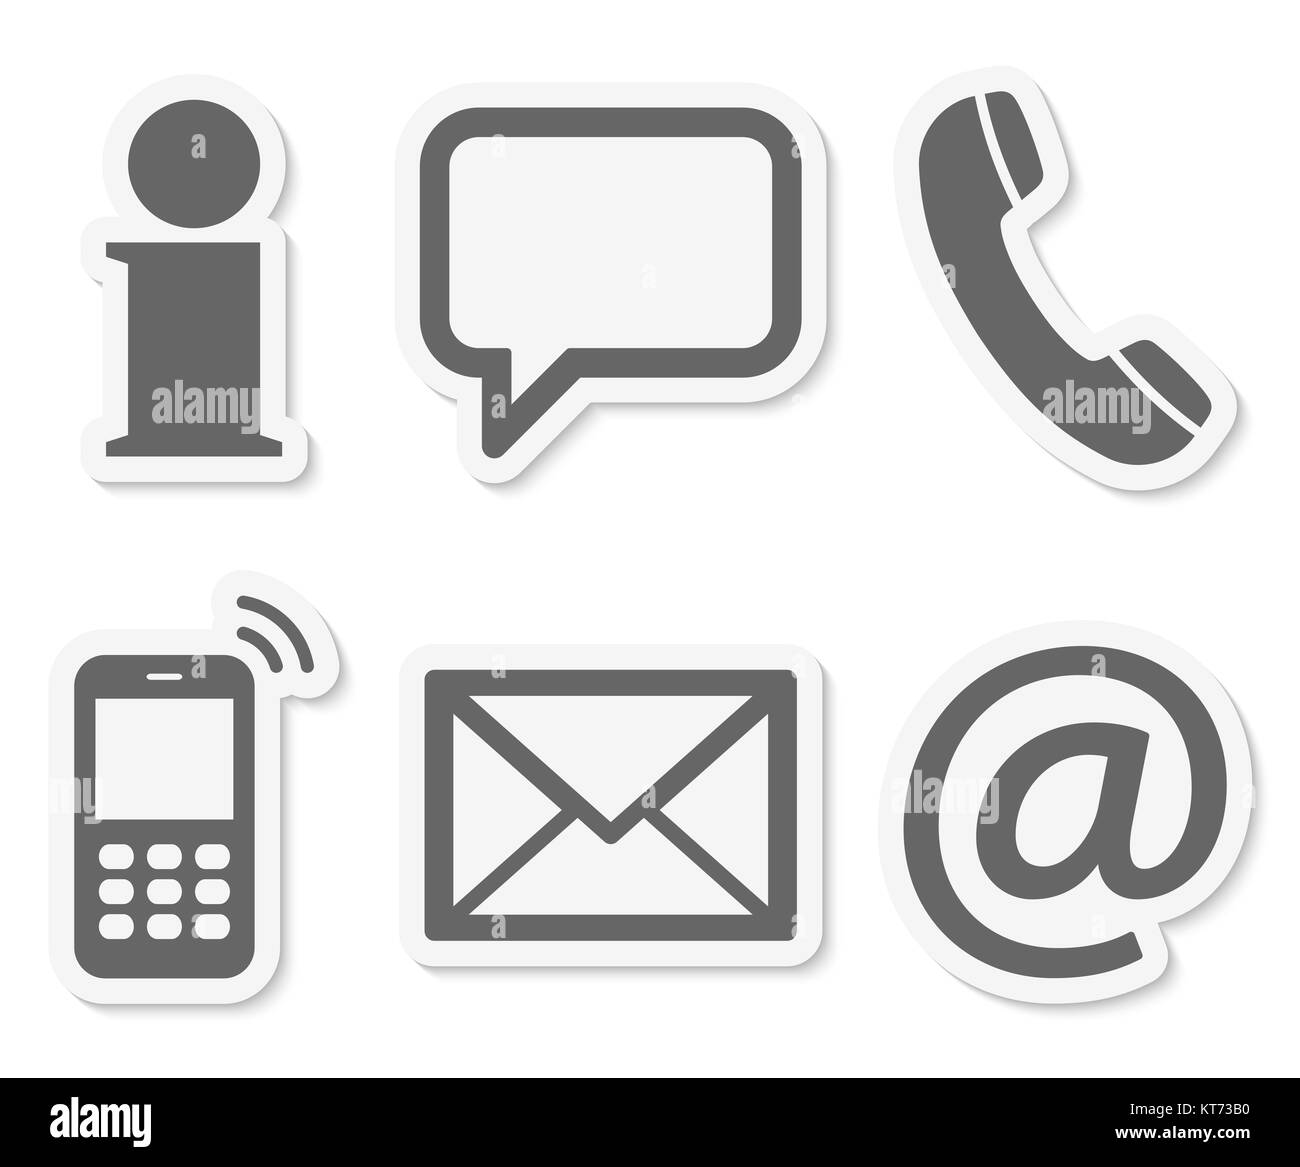 Contact Us, set of six gray colored icons with white frame and shadow Stock Photo